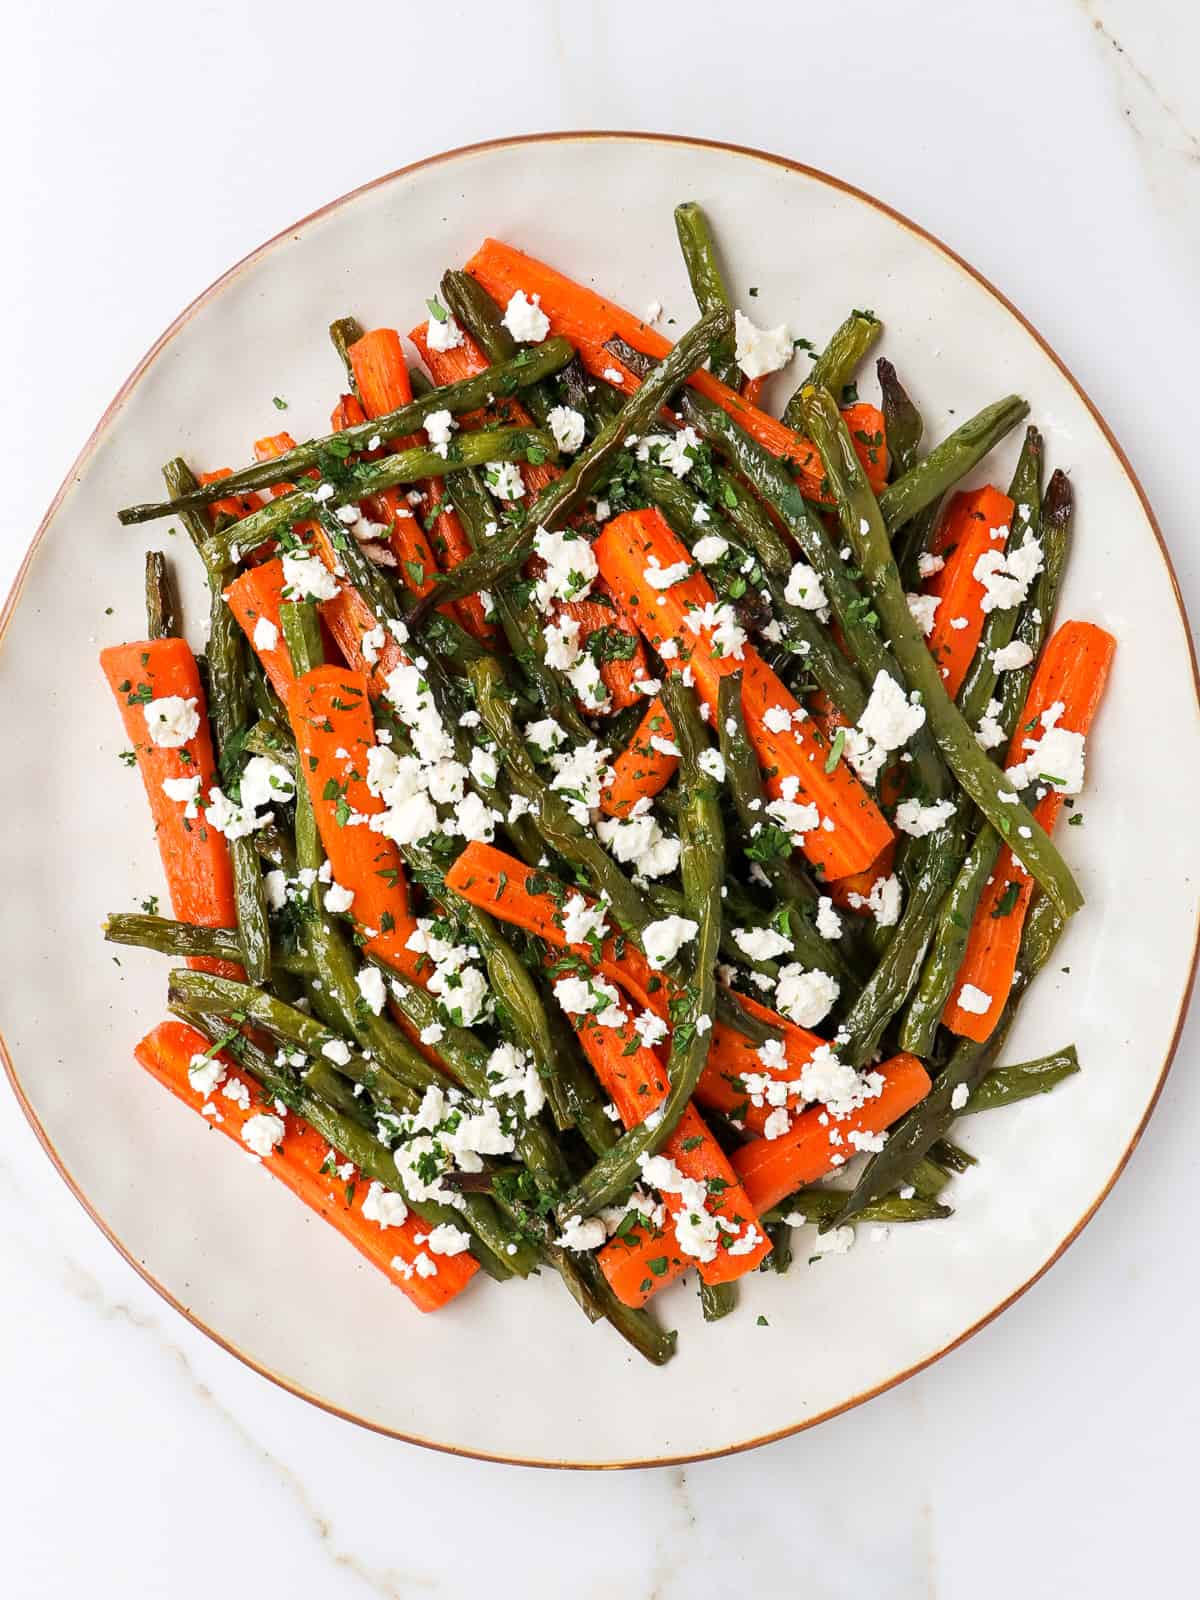 Roasted carrots and green beans with feta on a plate.